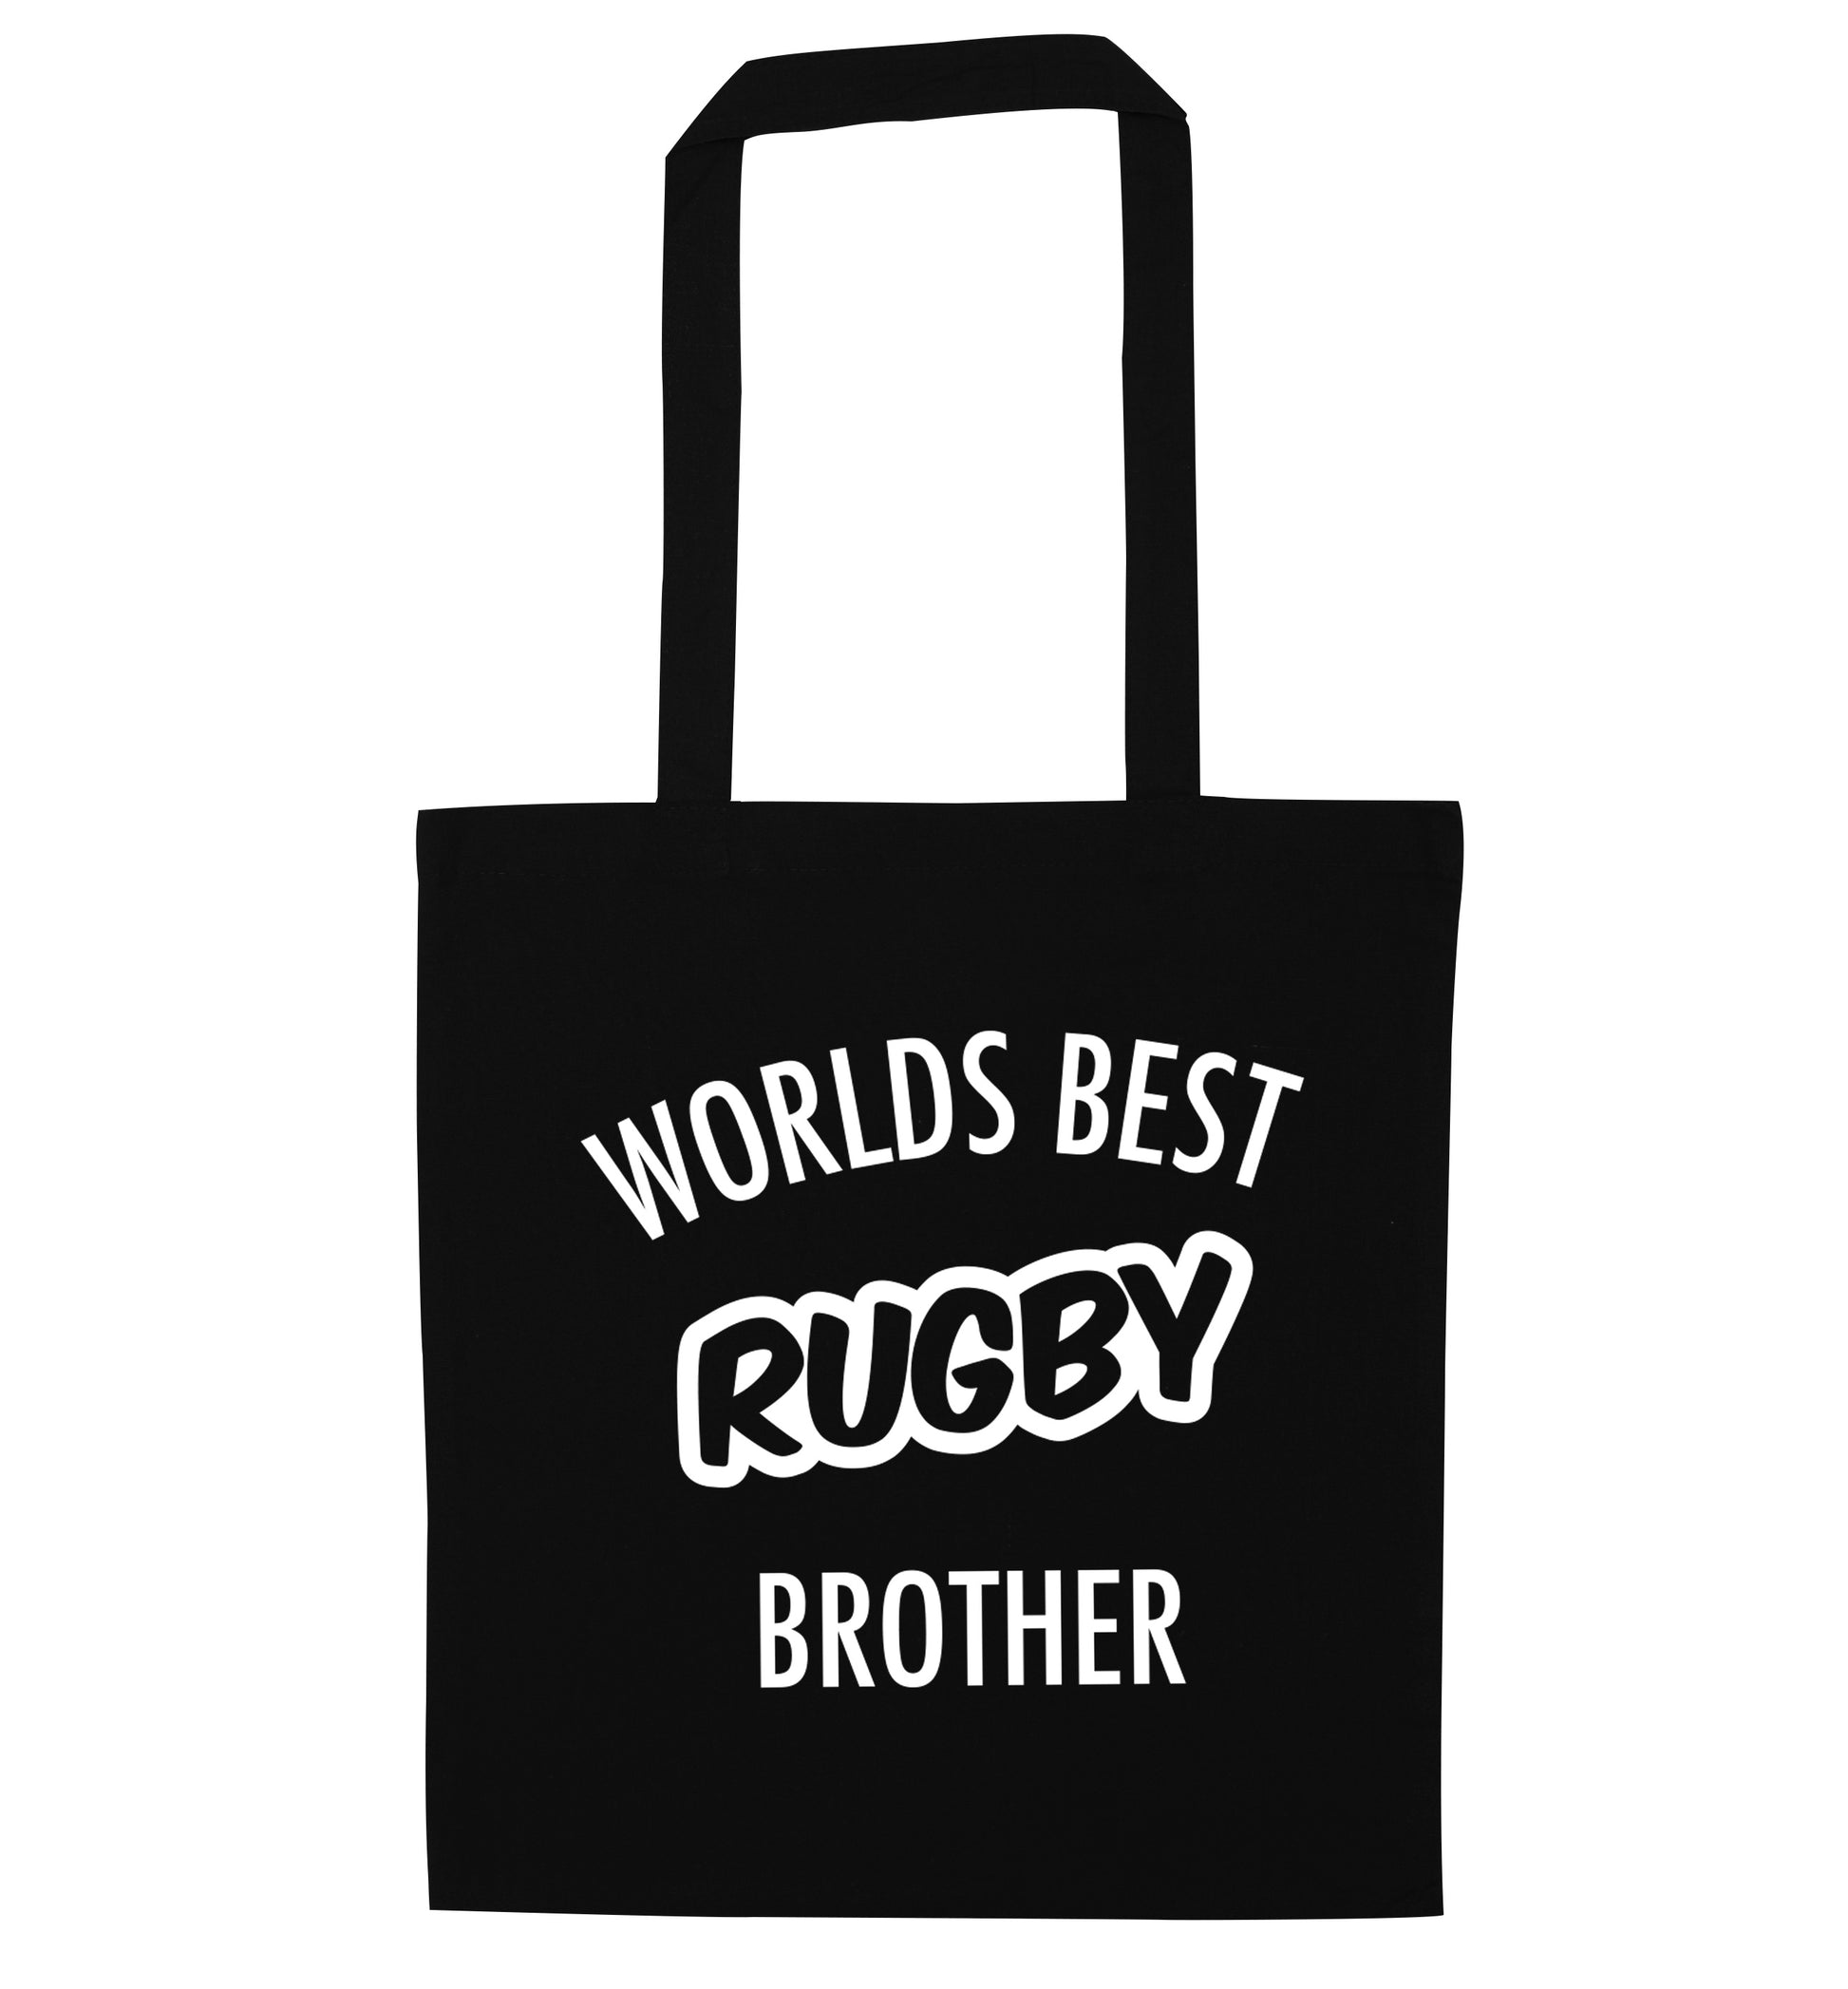 Worlds best rugby brother black tote bag